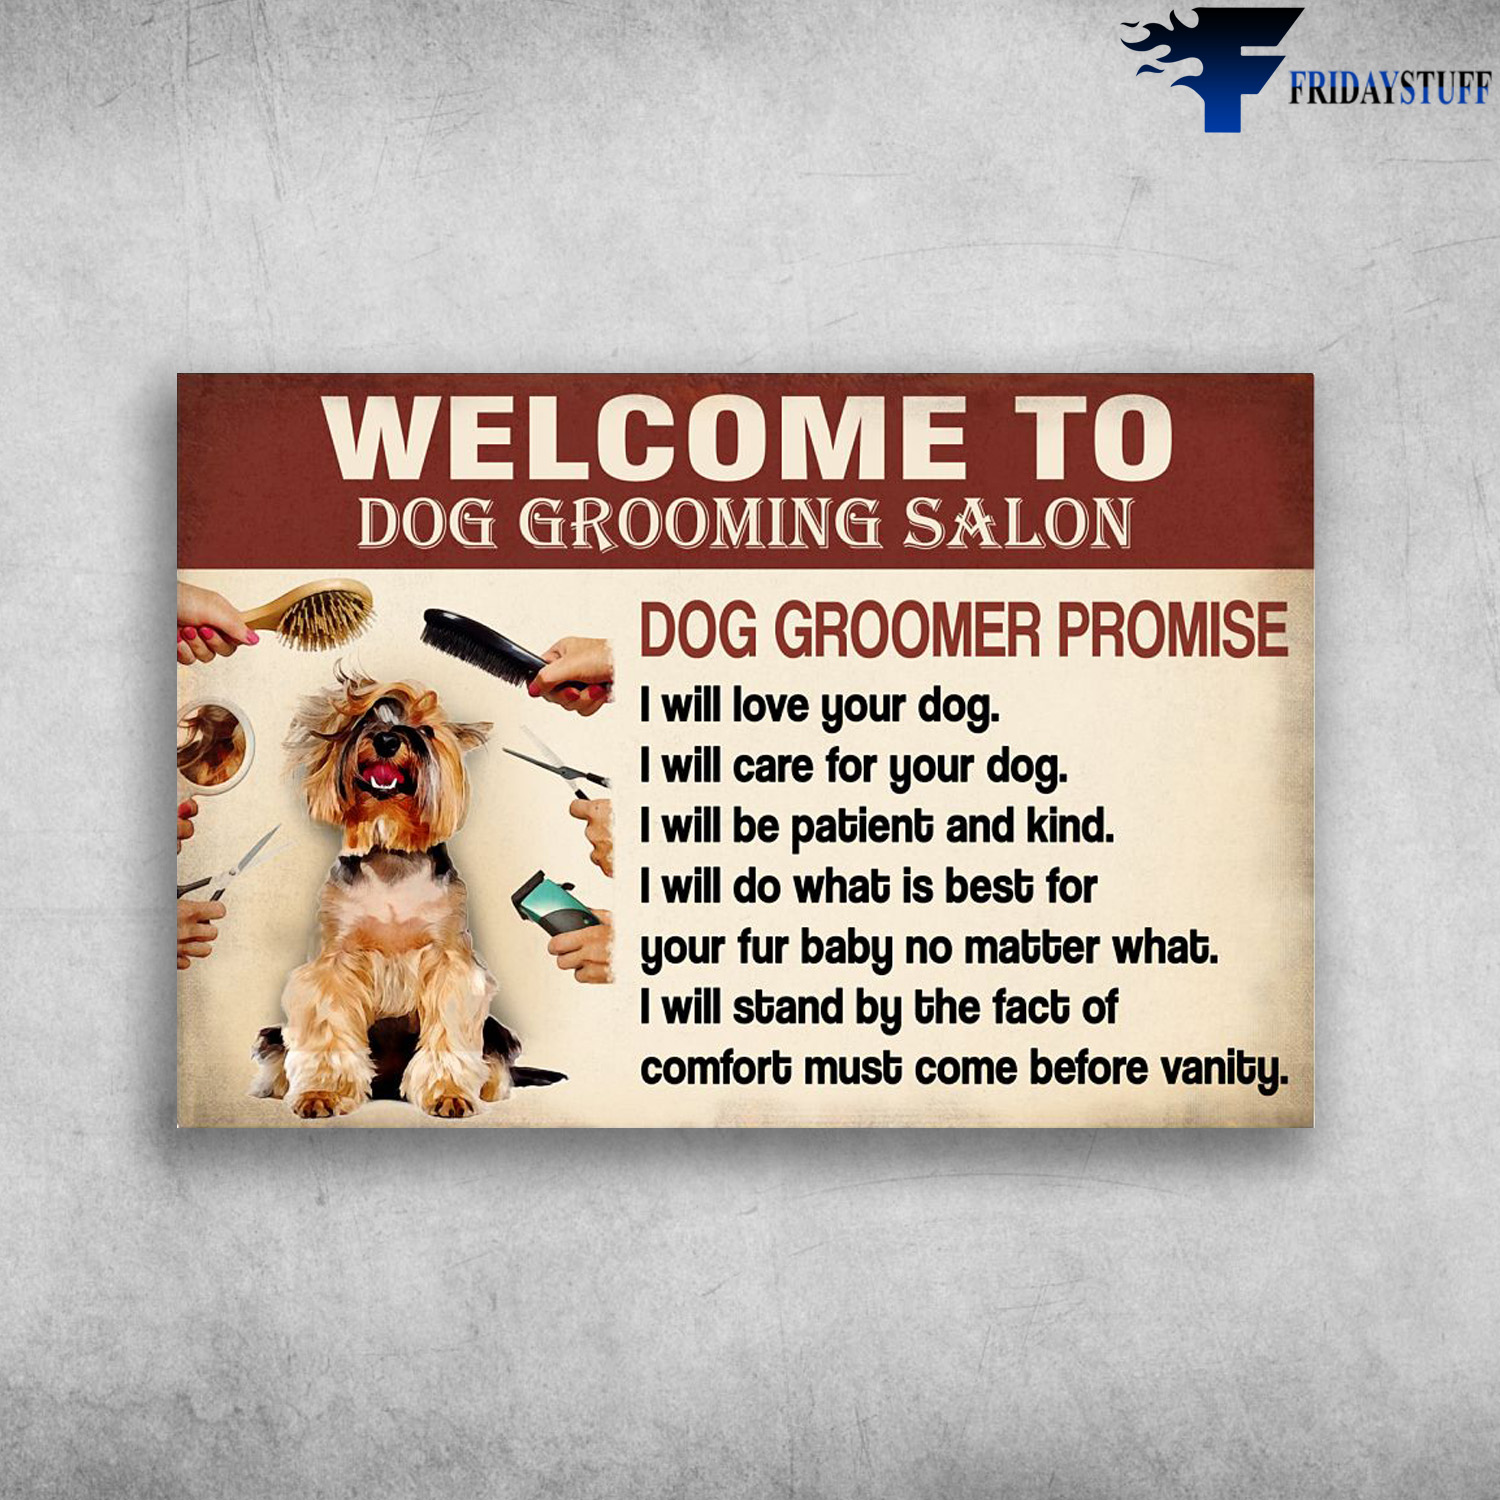 Dog Grooming - Welcome To Dog Grooming Salon, Dog Groomer Promise, I Will Love Your Dog, I Will Care For Your Dog, I Will Be Patient And Kind, I Will Do What Is Best, For Your Fur Baby, No Matter What